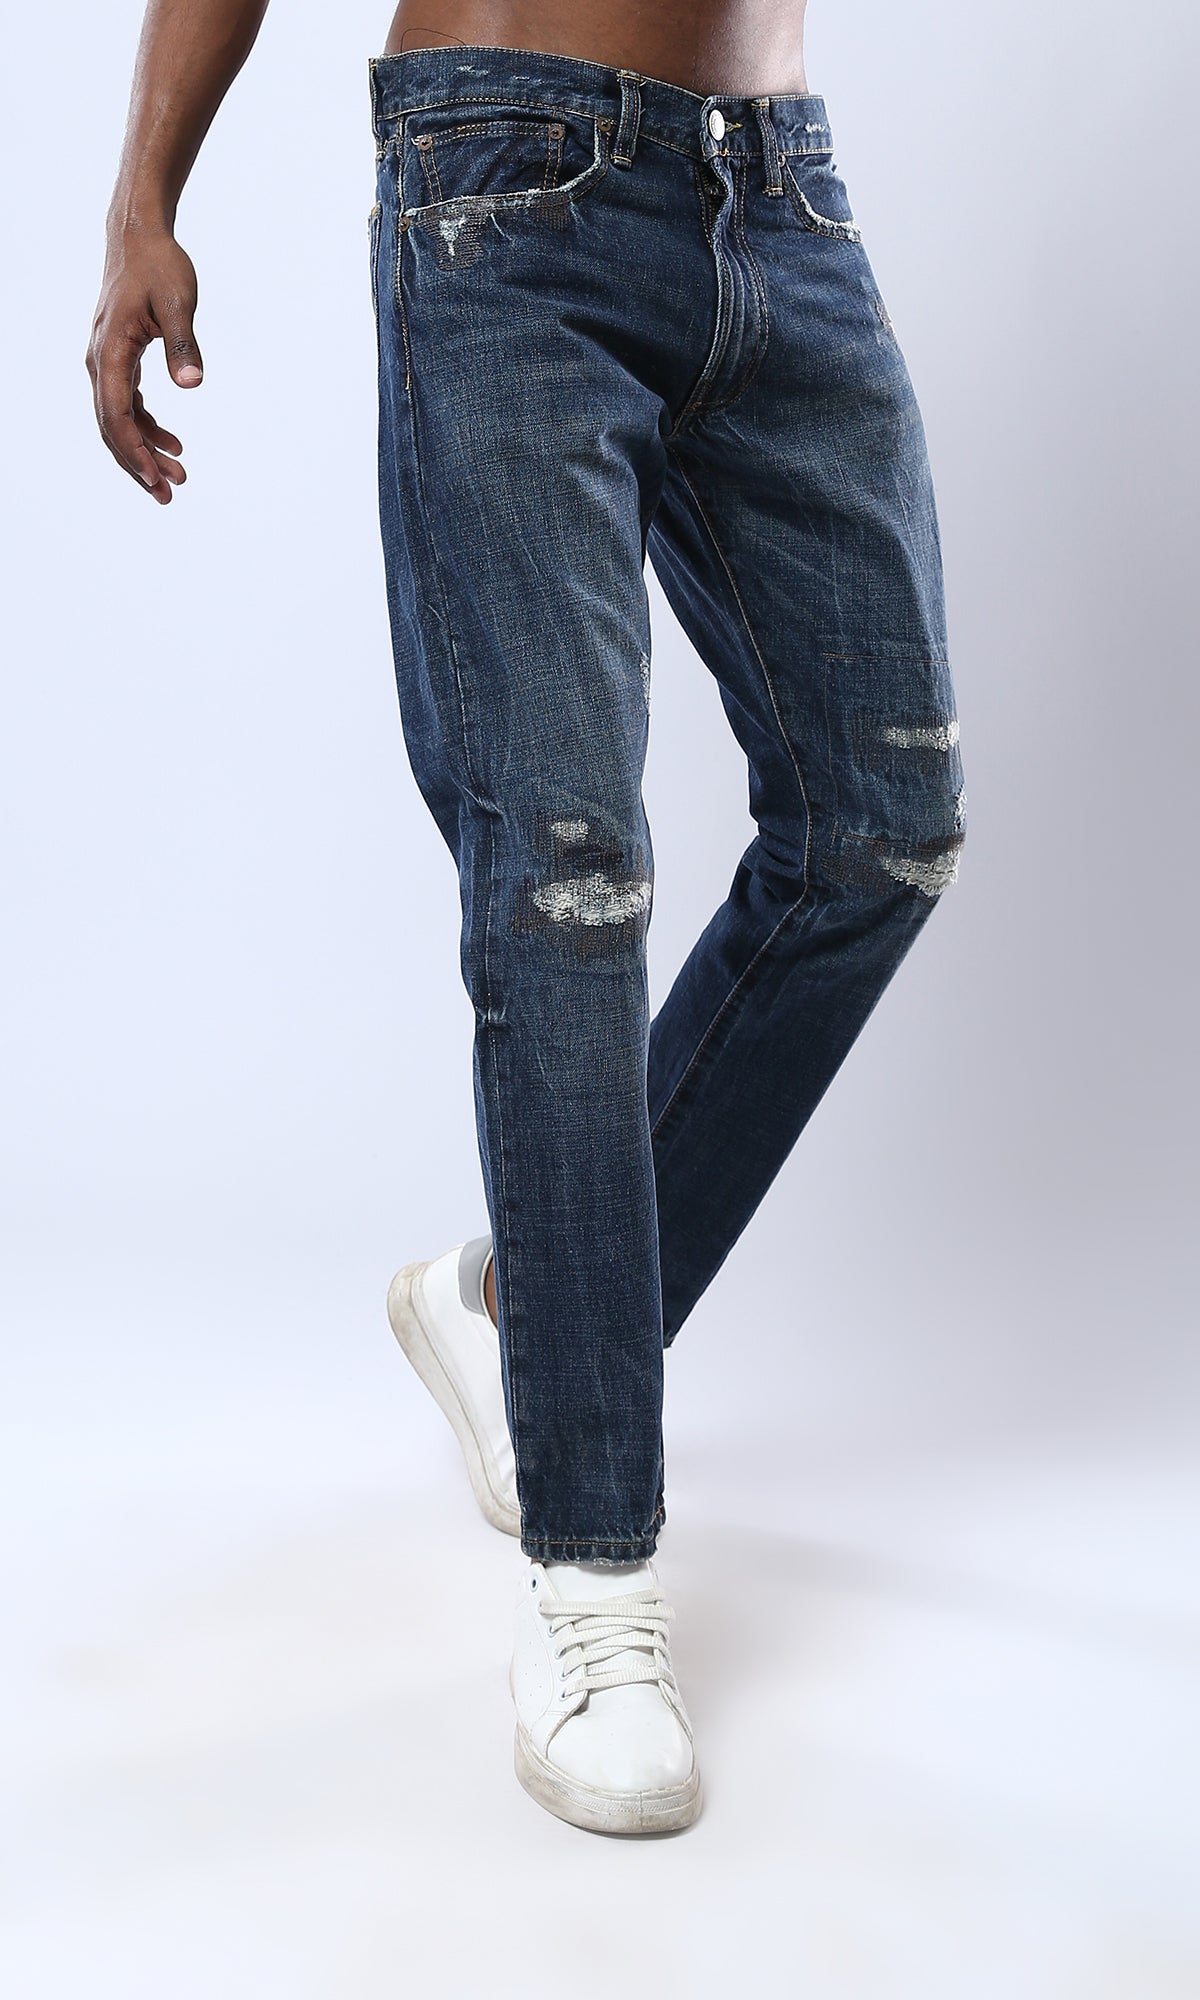 O178110 Navy Blue Stitched With Ripps Casual Jeans